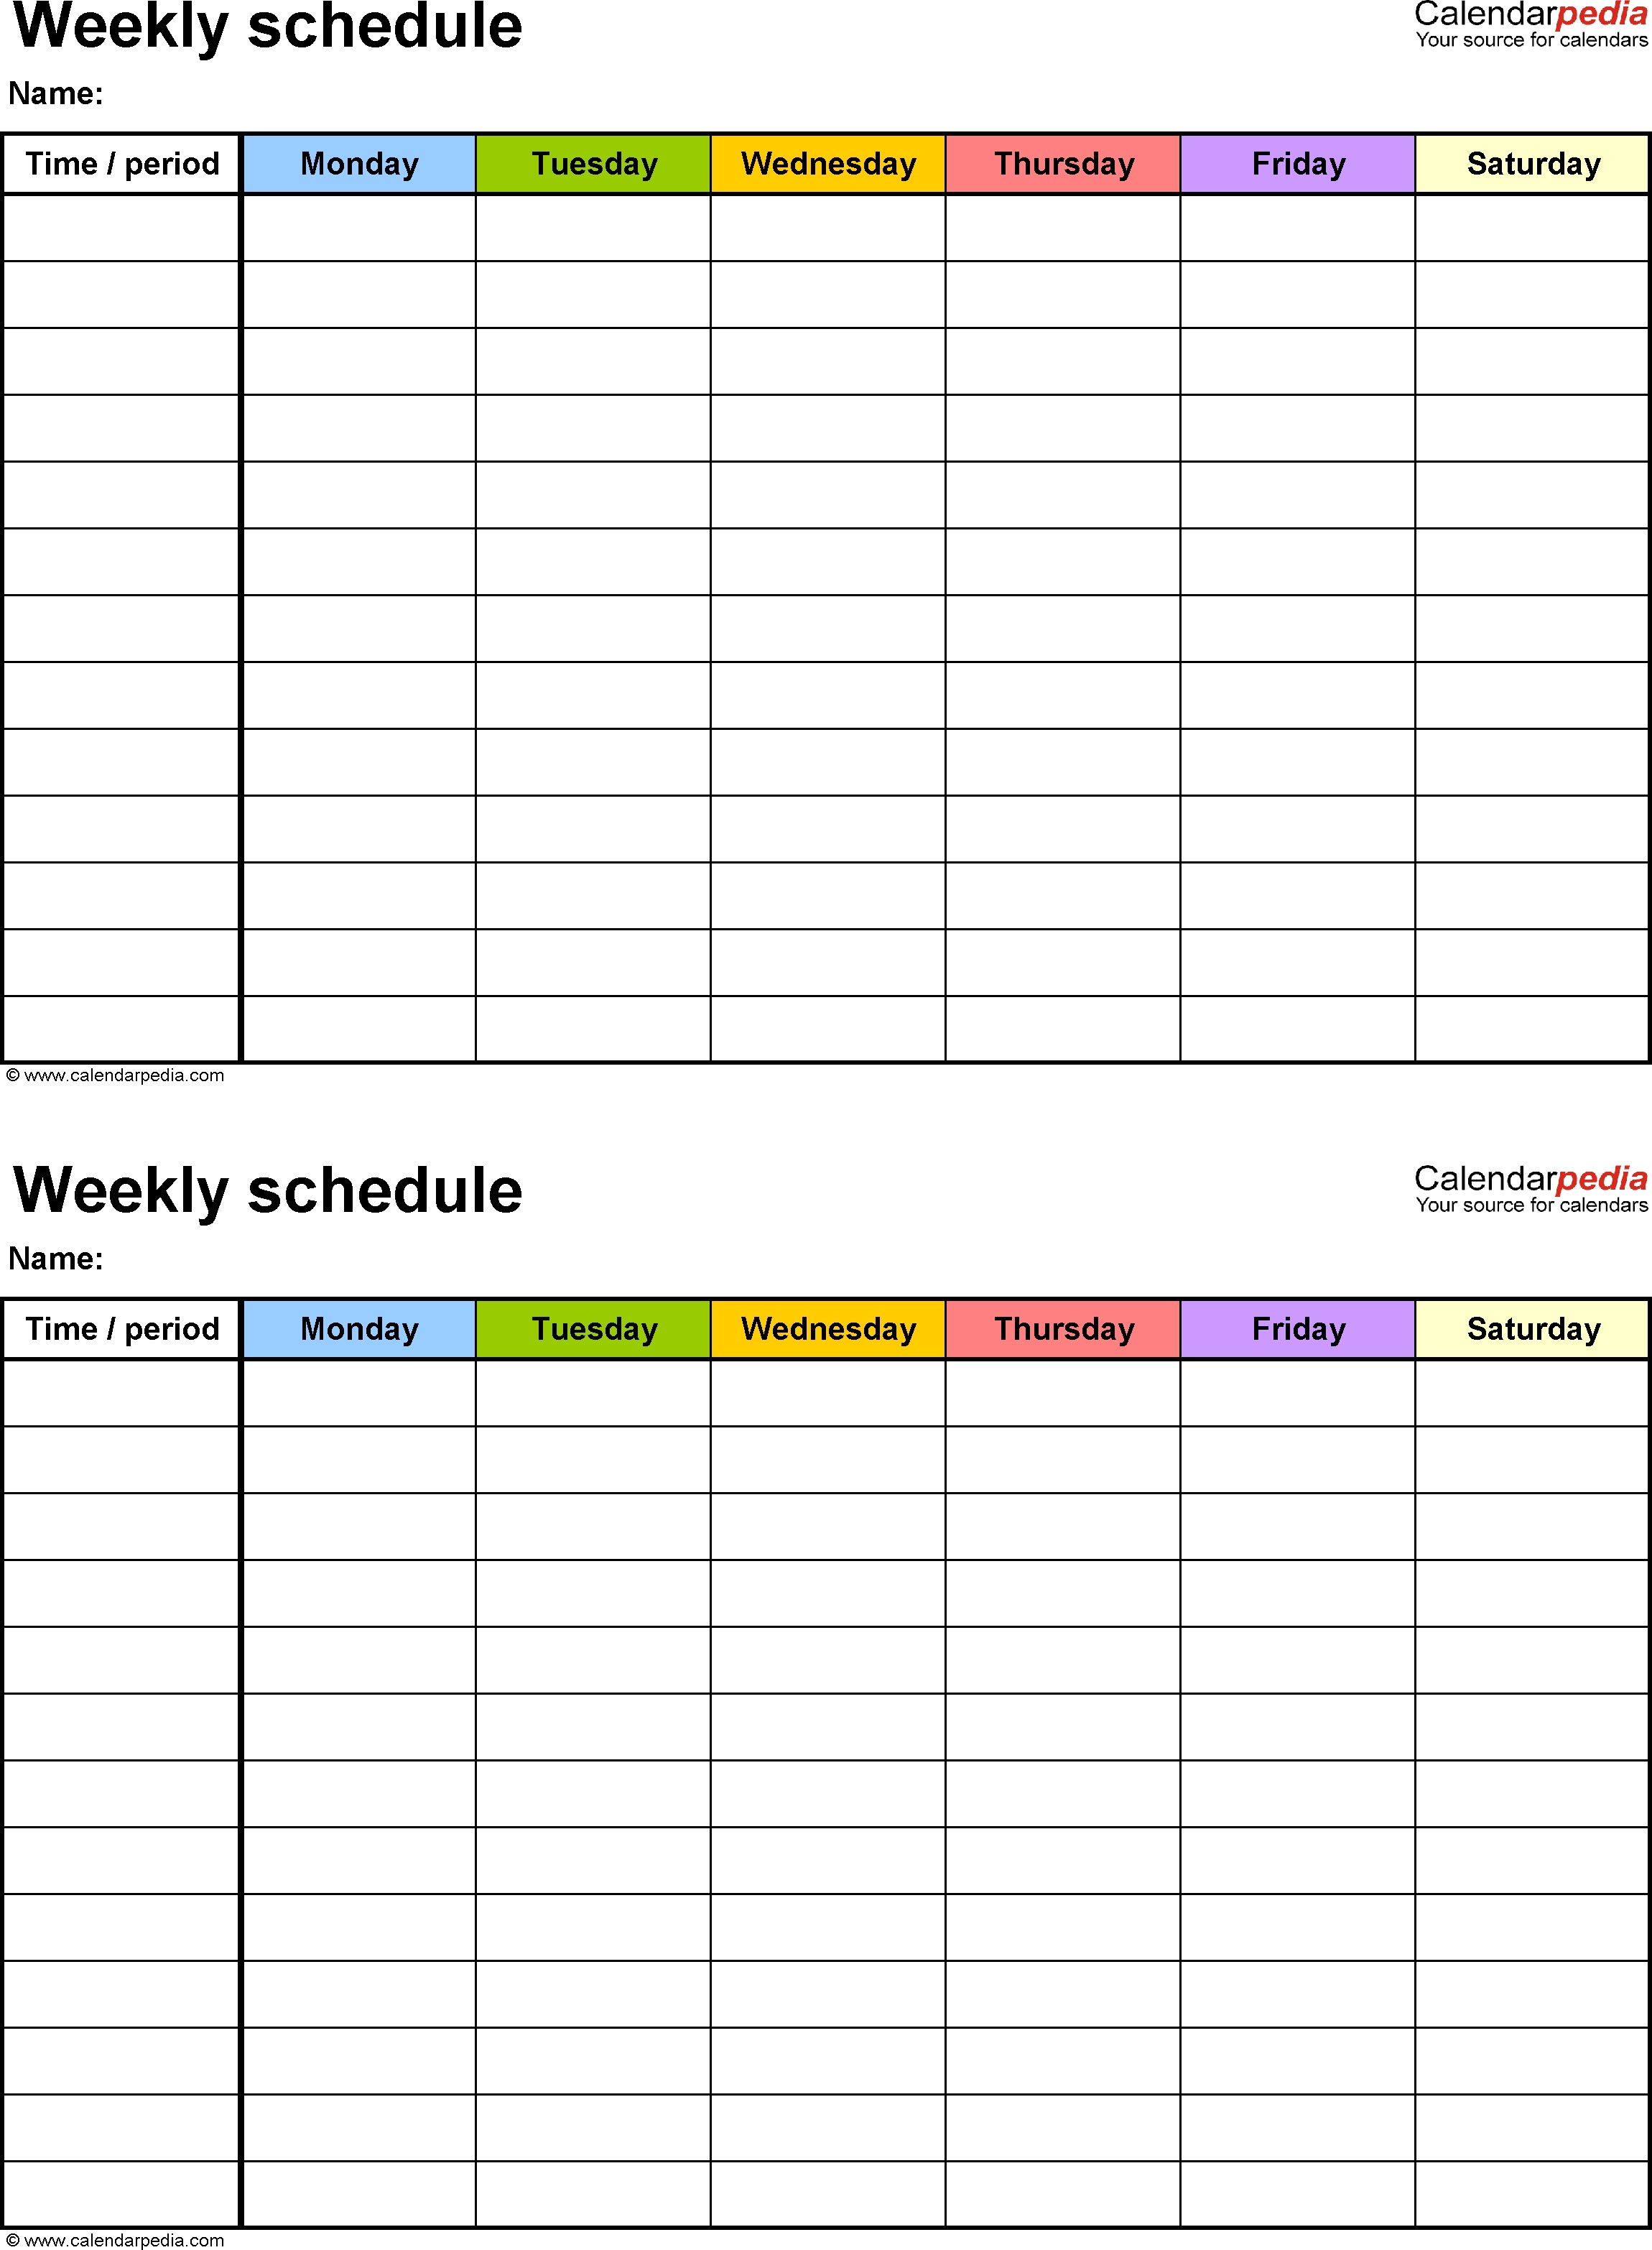 Free Weekly Schedule Templates For Excel - 18 Templates throughout Blank Copy Of Monthly Sign Up Sheet Calendar Schedule